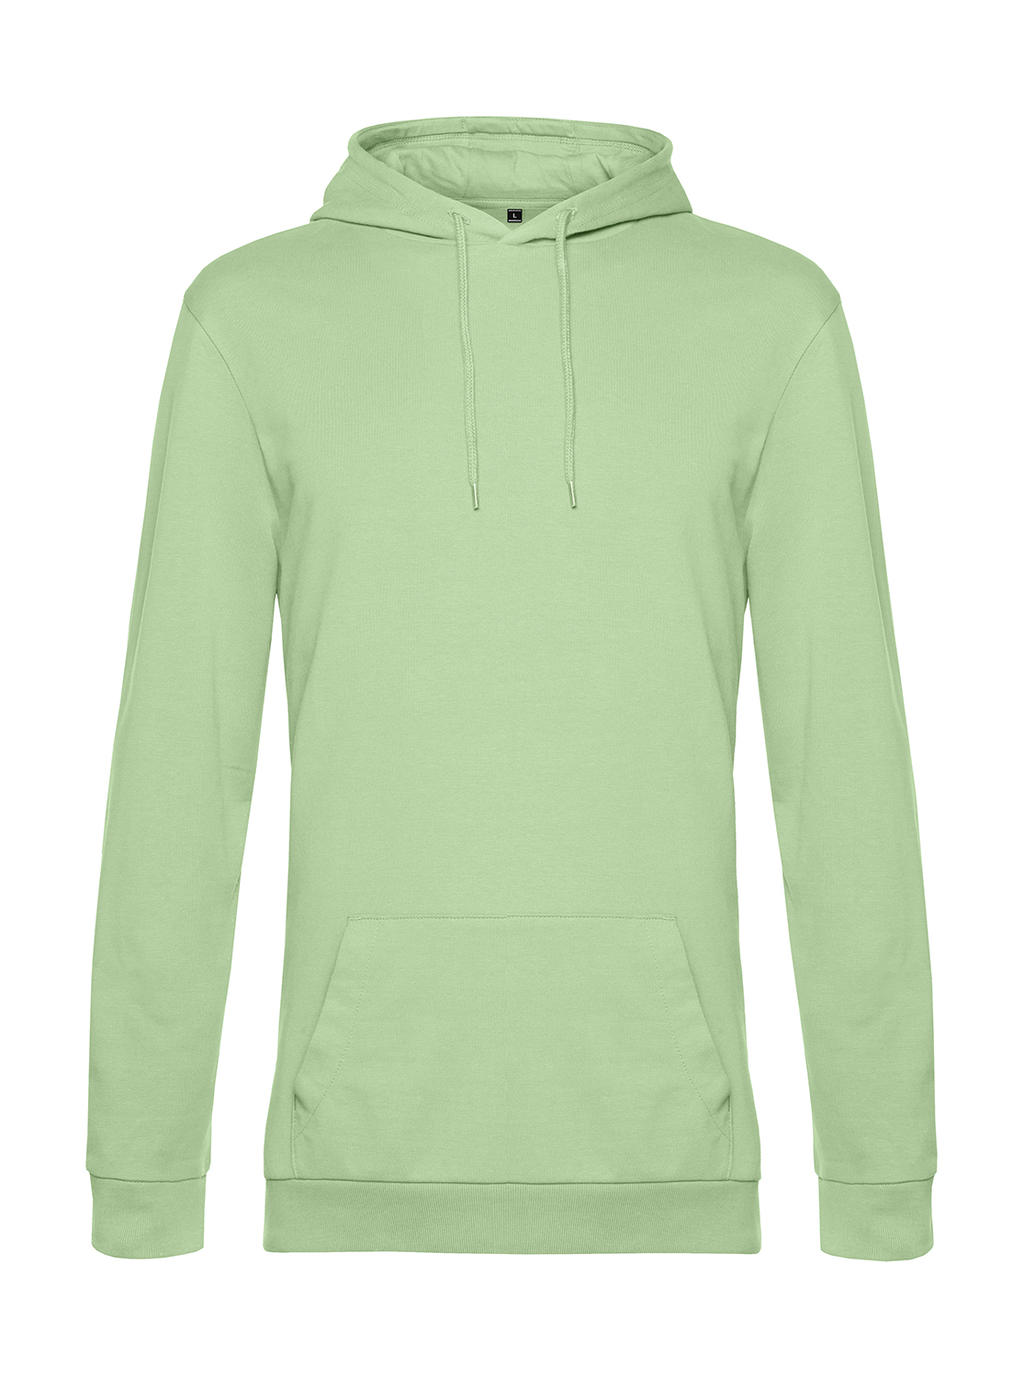  #Hoodie French Terry in Farbe Light Jade